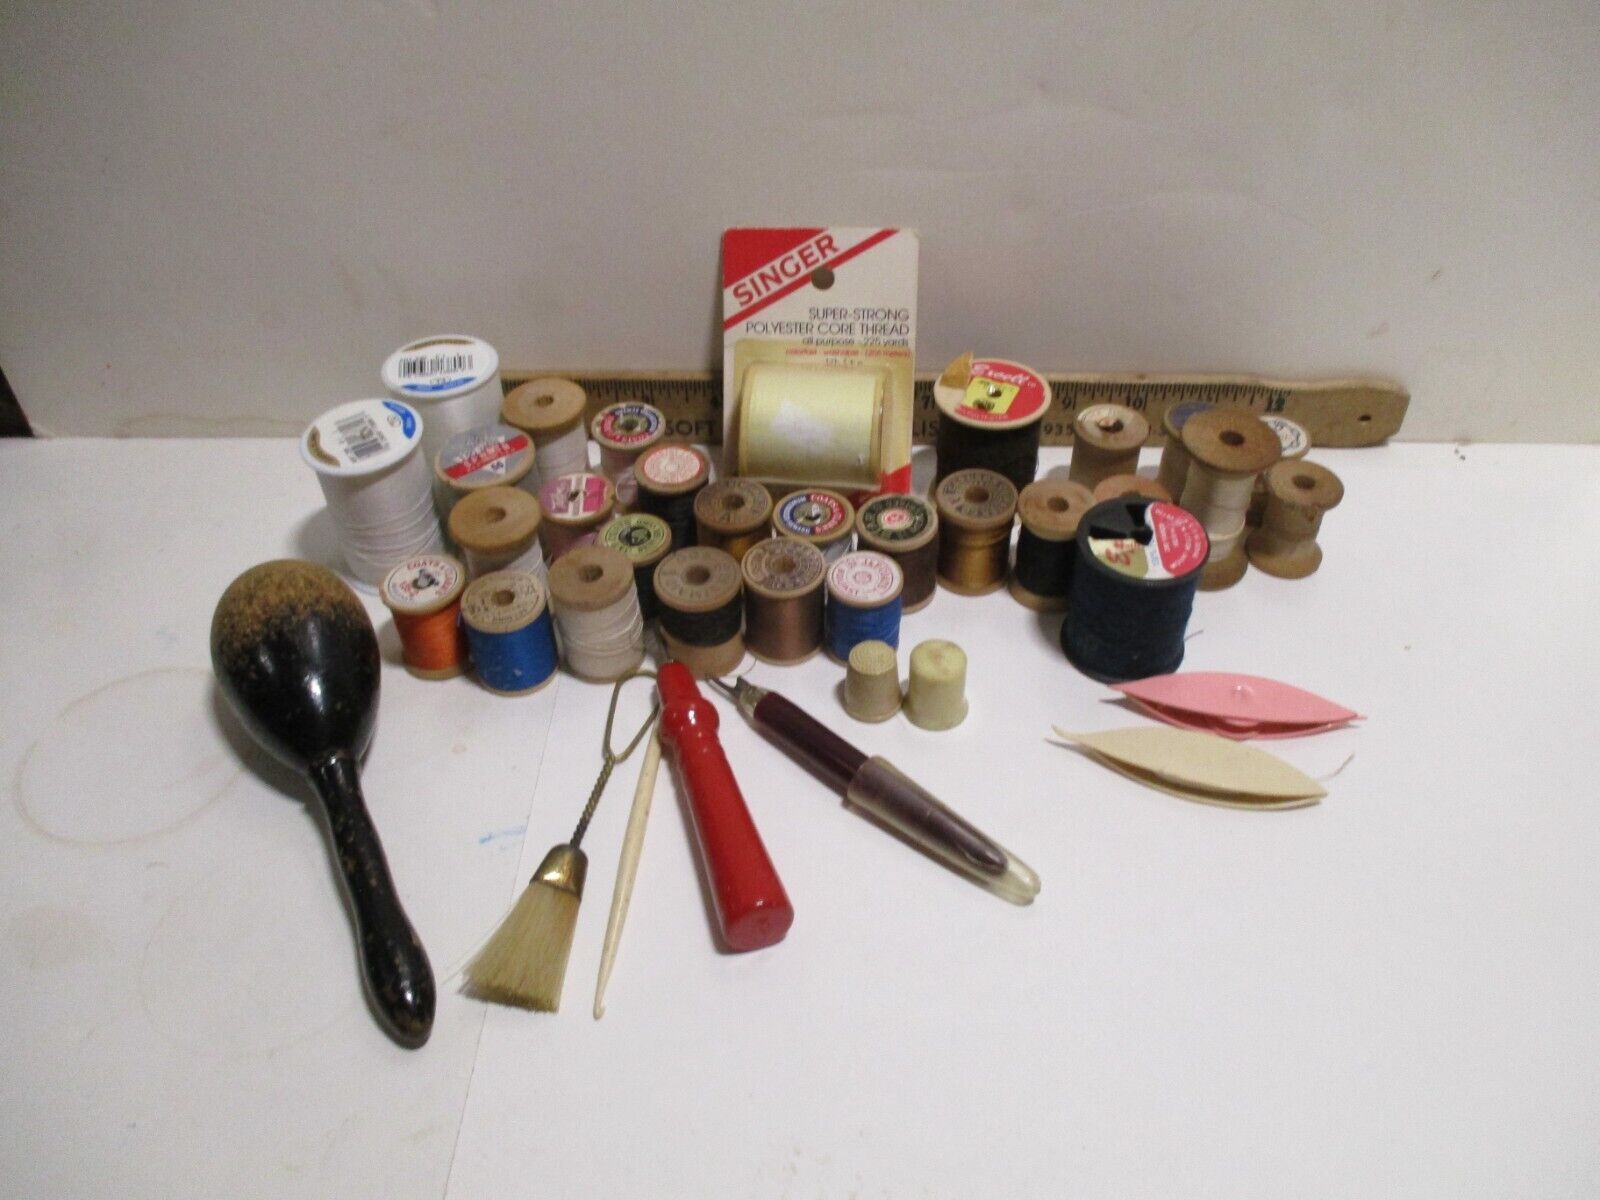 A LARGE ASSORTMENT OF VINTAGE SEWING ITEMS.